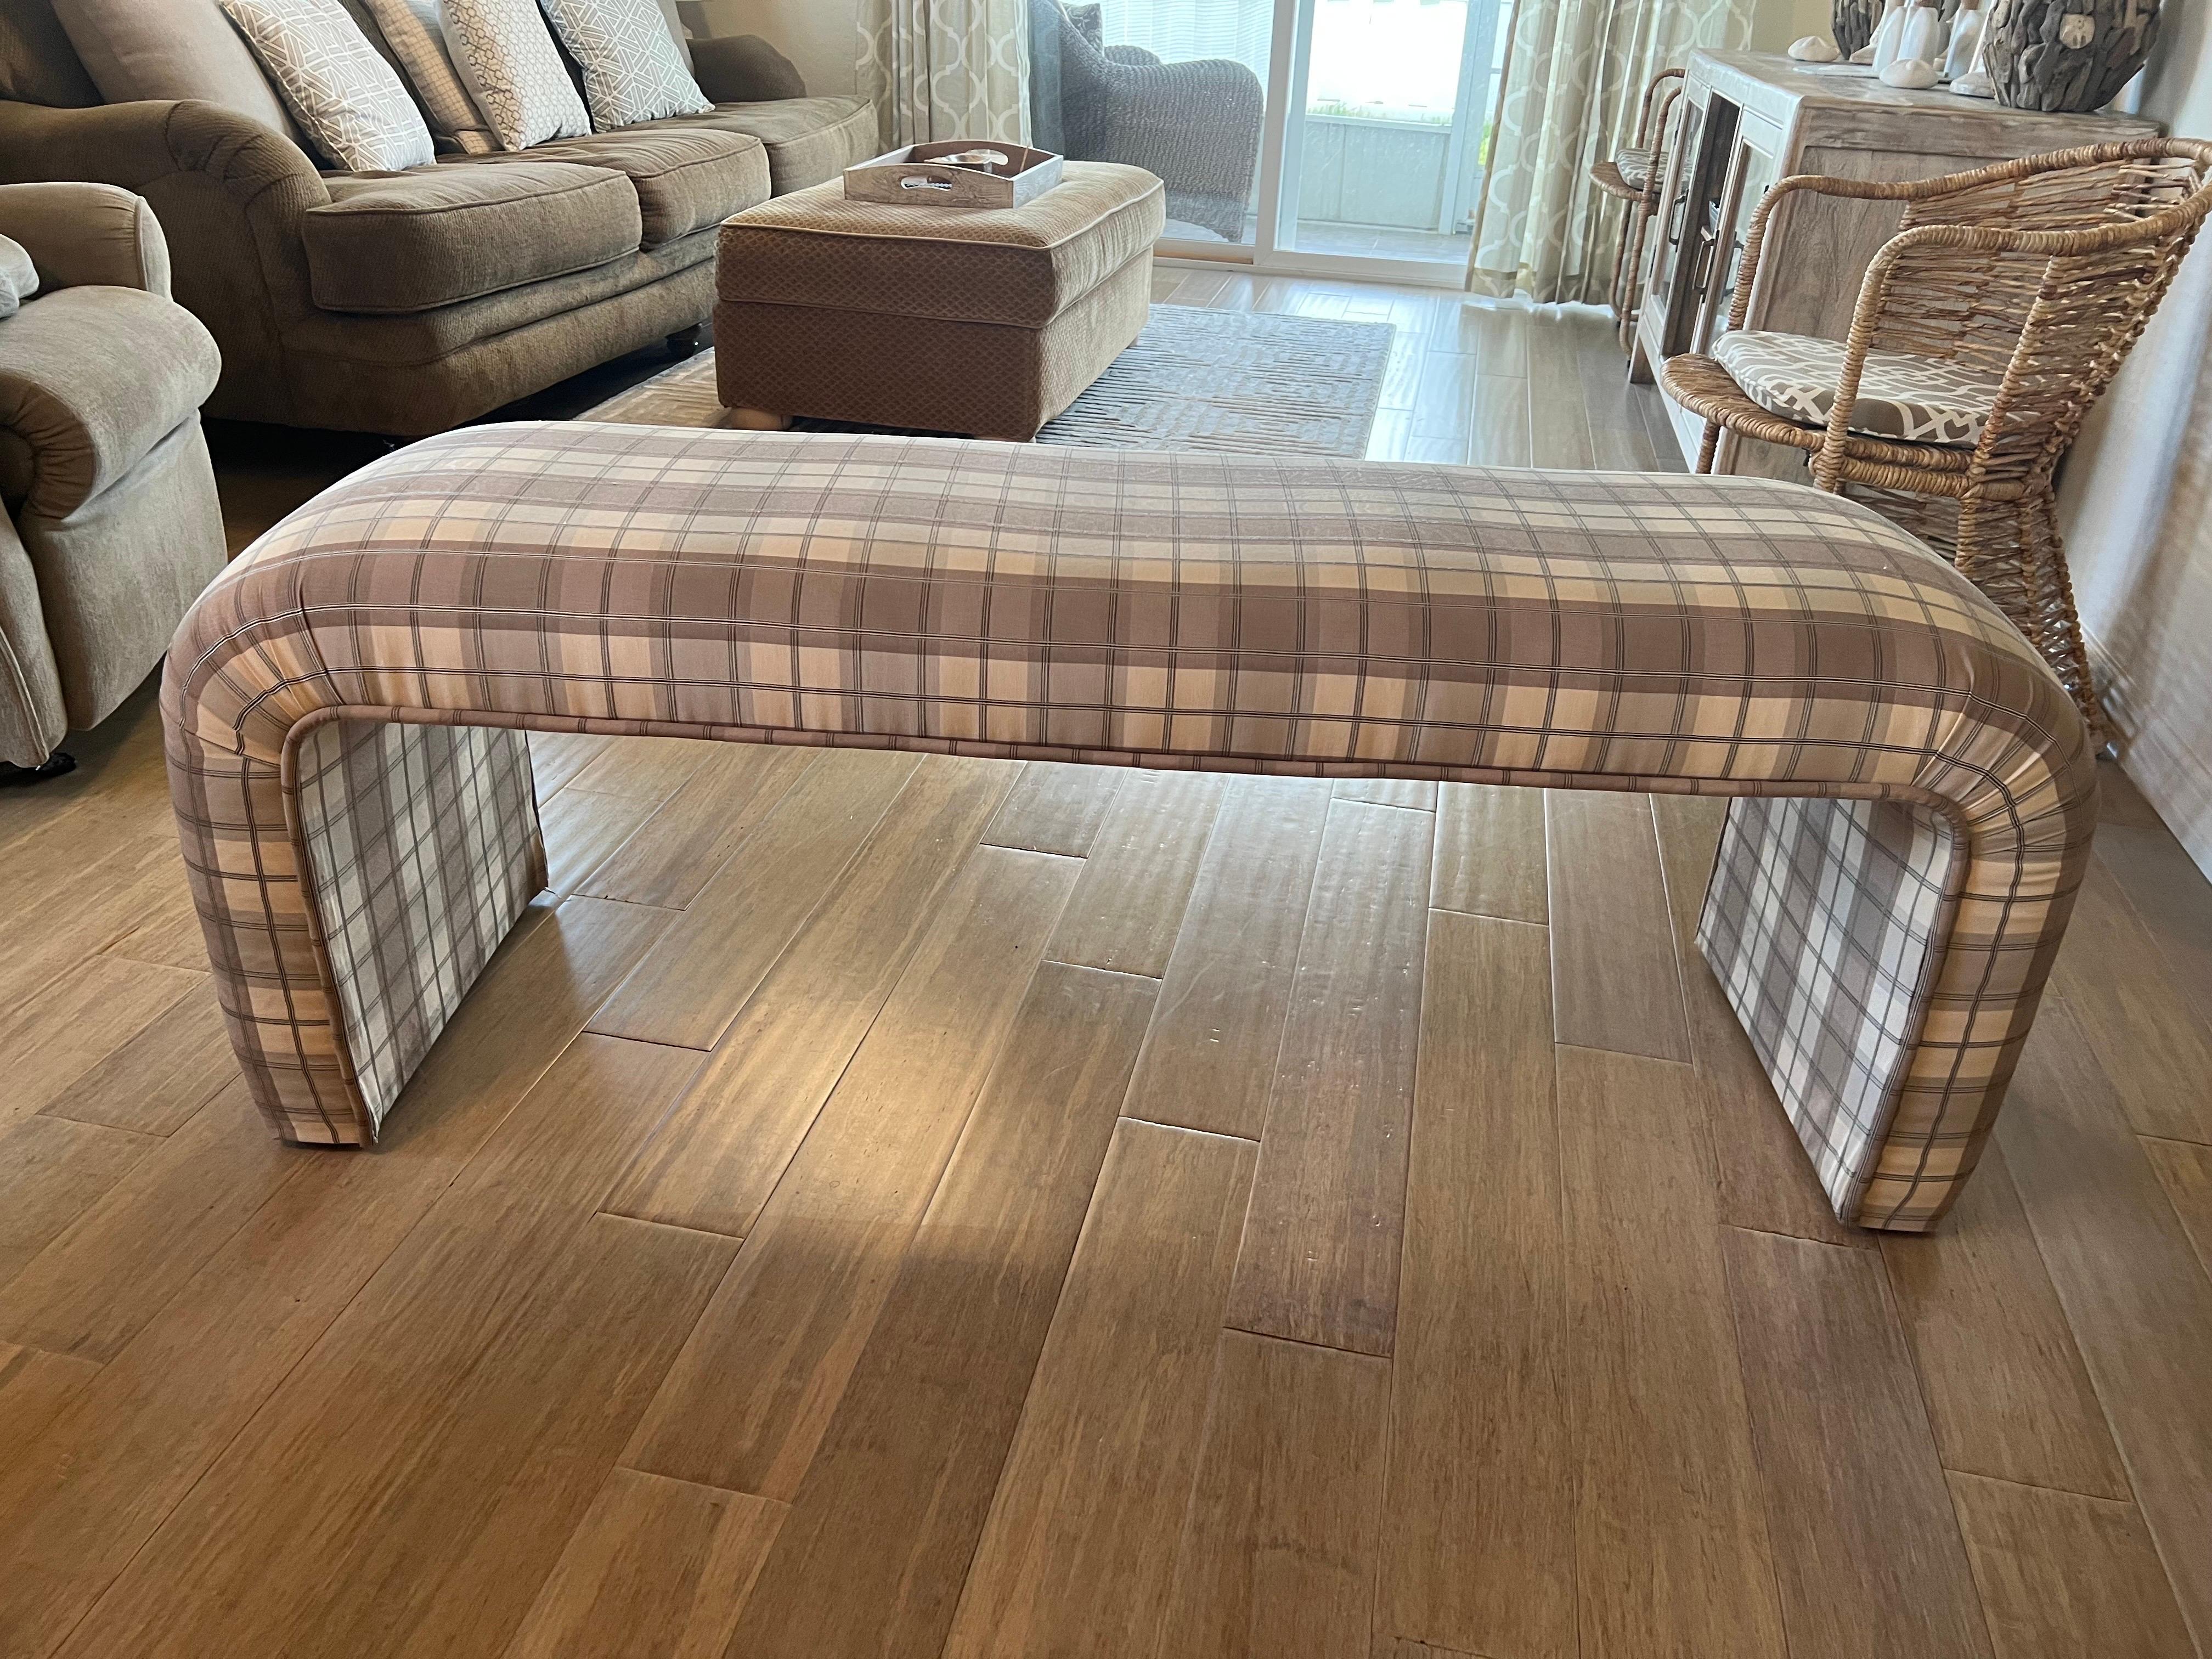 Post Modern Waterfall Bench in the style of Milo Baughman. Classic shape and design. The plaid moire fabric is in great condition so does not need to be replaced. But would also look great in a colorful contemporary fabric. Perfect for at the end of